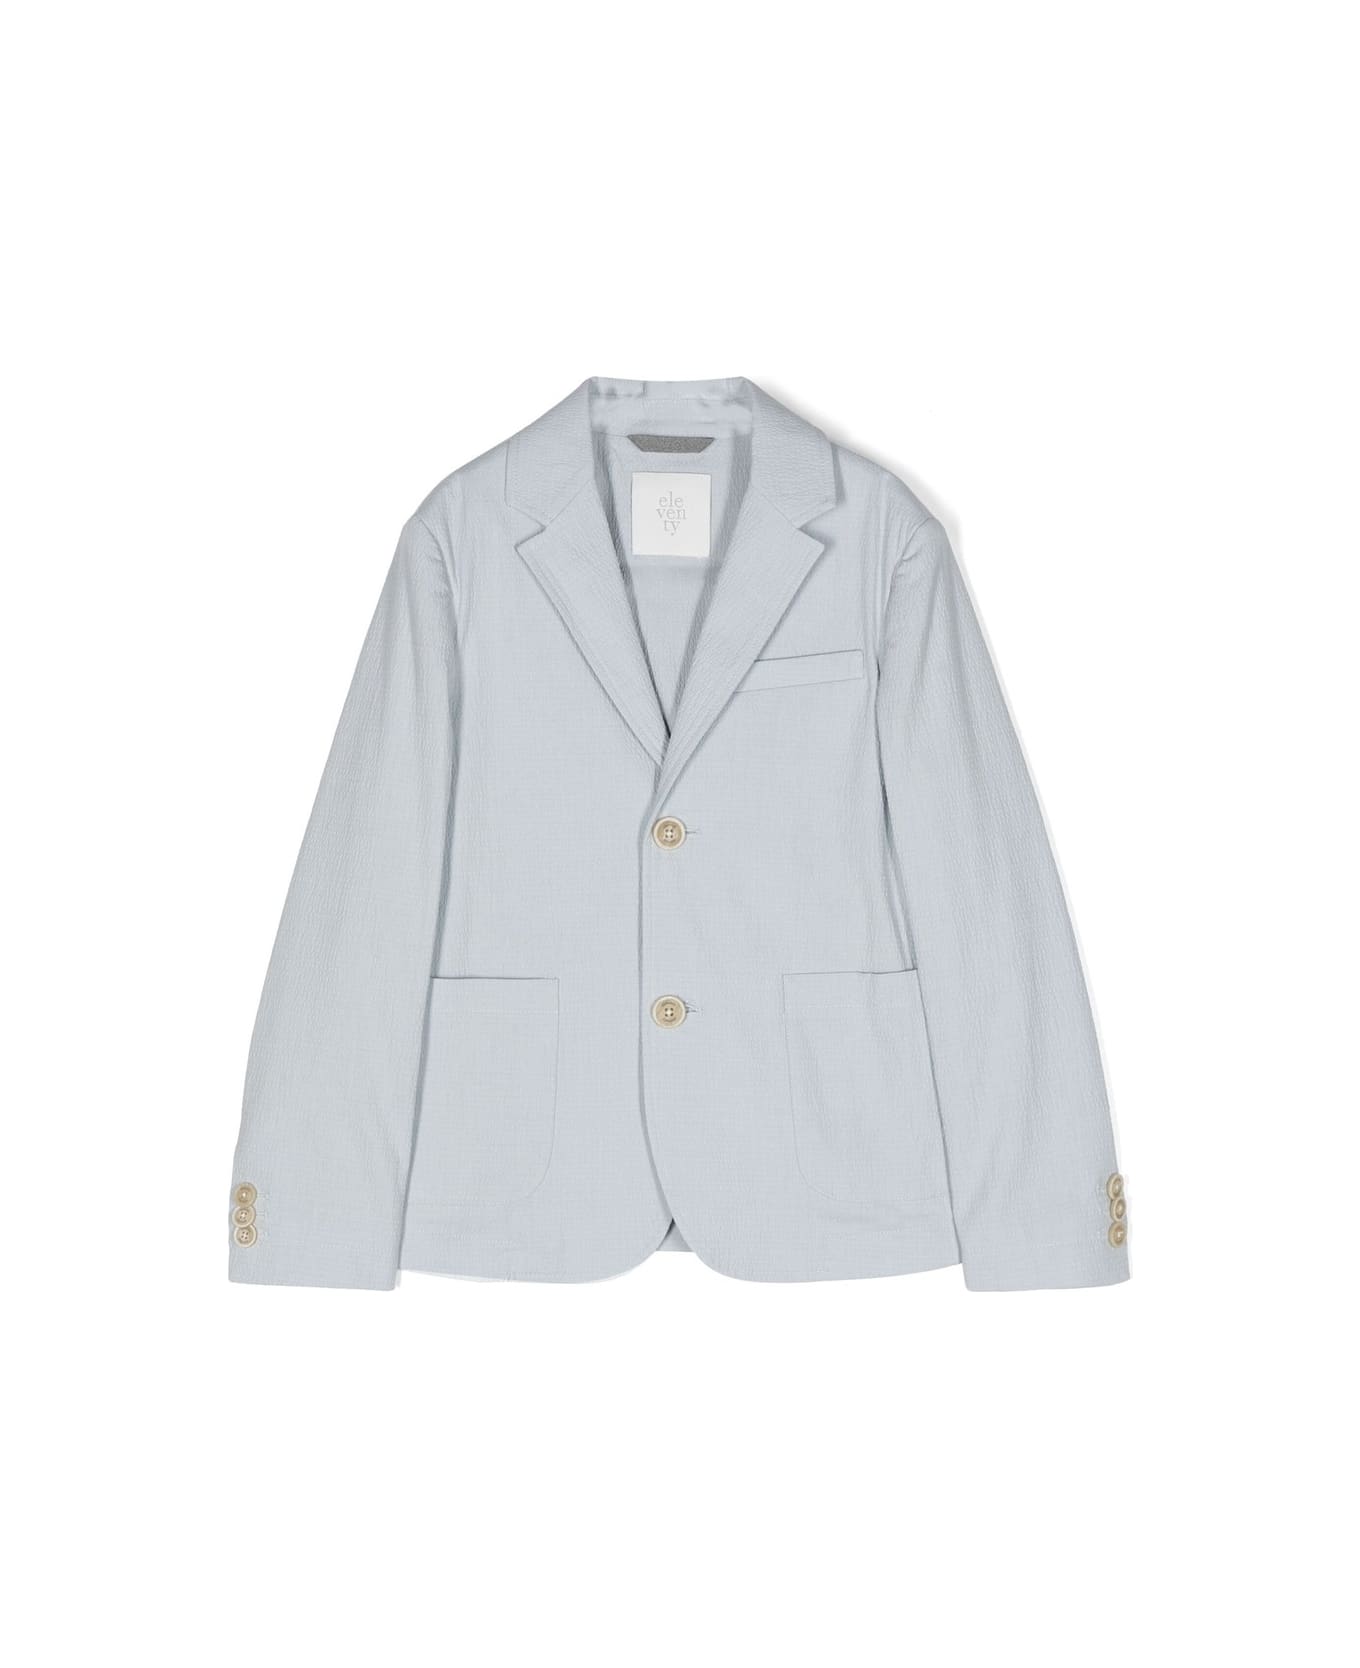 Eleventy Light Blue Single Breasted Blazer With Contrast Buttons - Blue